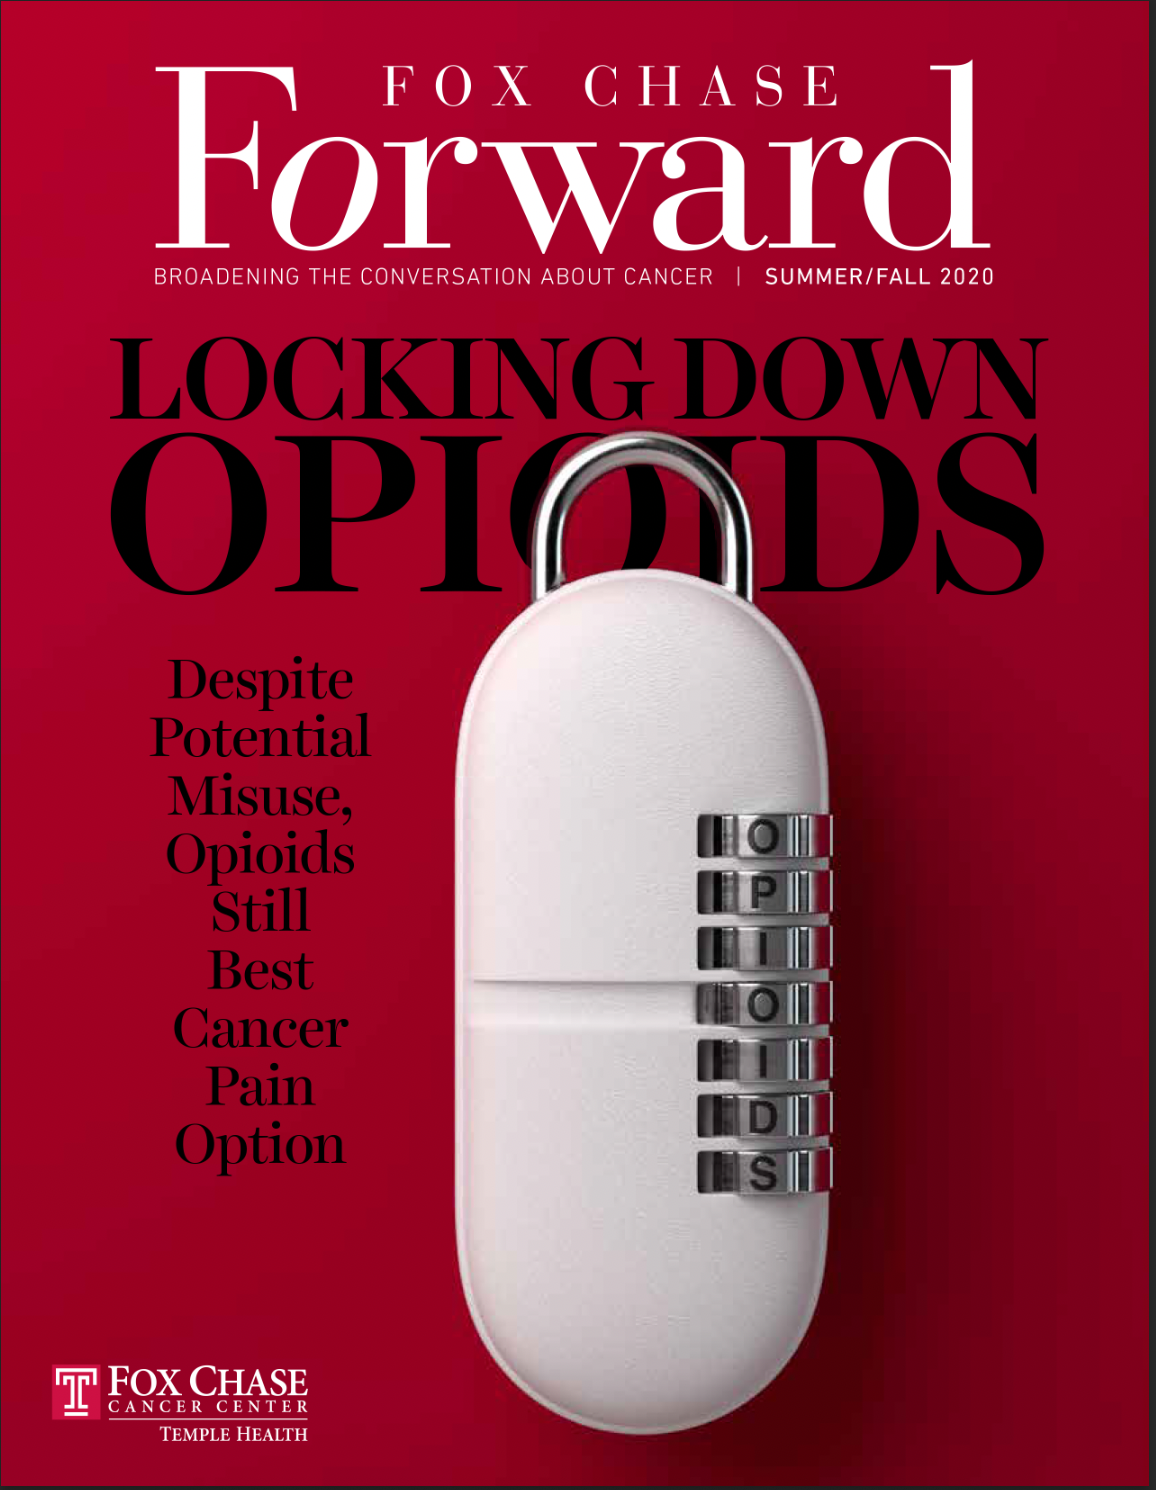 Fox Chase Forward: Broadening the conversation about cancer, Summer/Fall 2020 Locking Down Opioids - Despite Potential Misuuse, Opioids Still Best Cander Pain Option, Fox Chase Cancer Center Temple Health, cover of the magazine with a picture of a lock